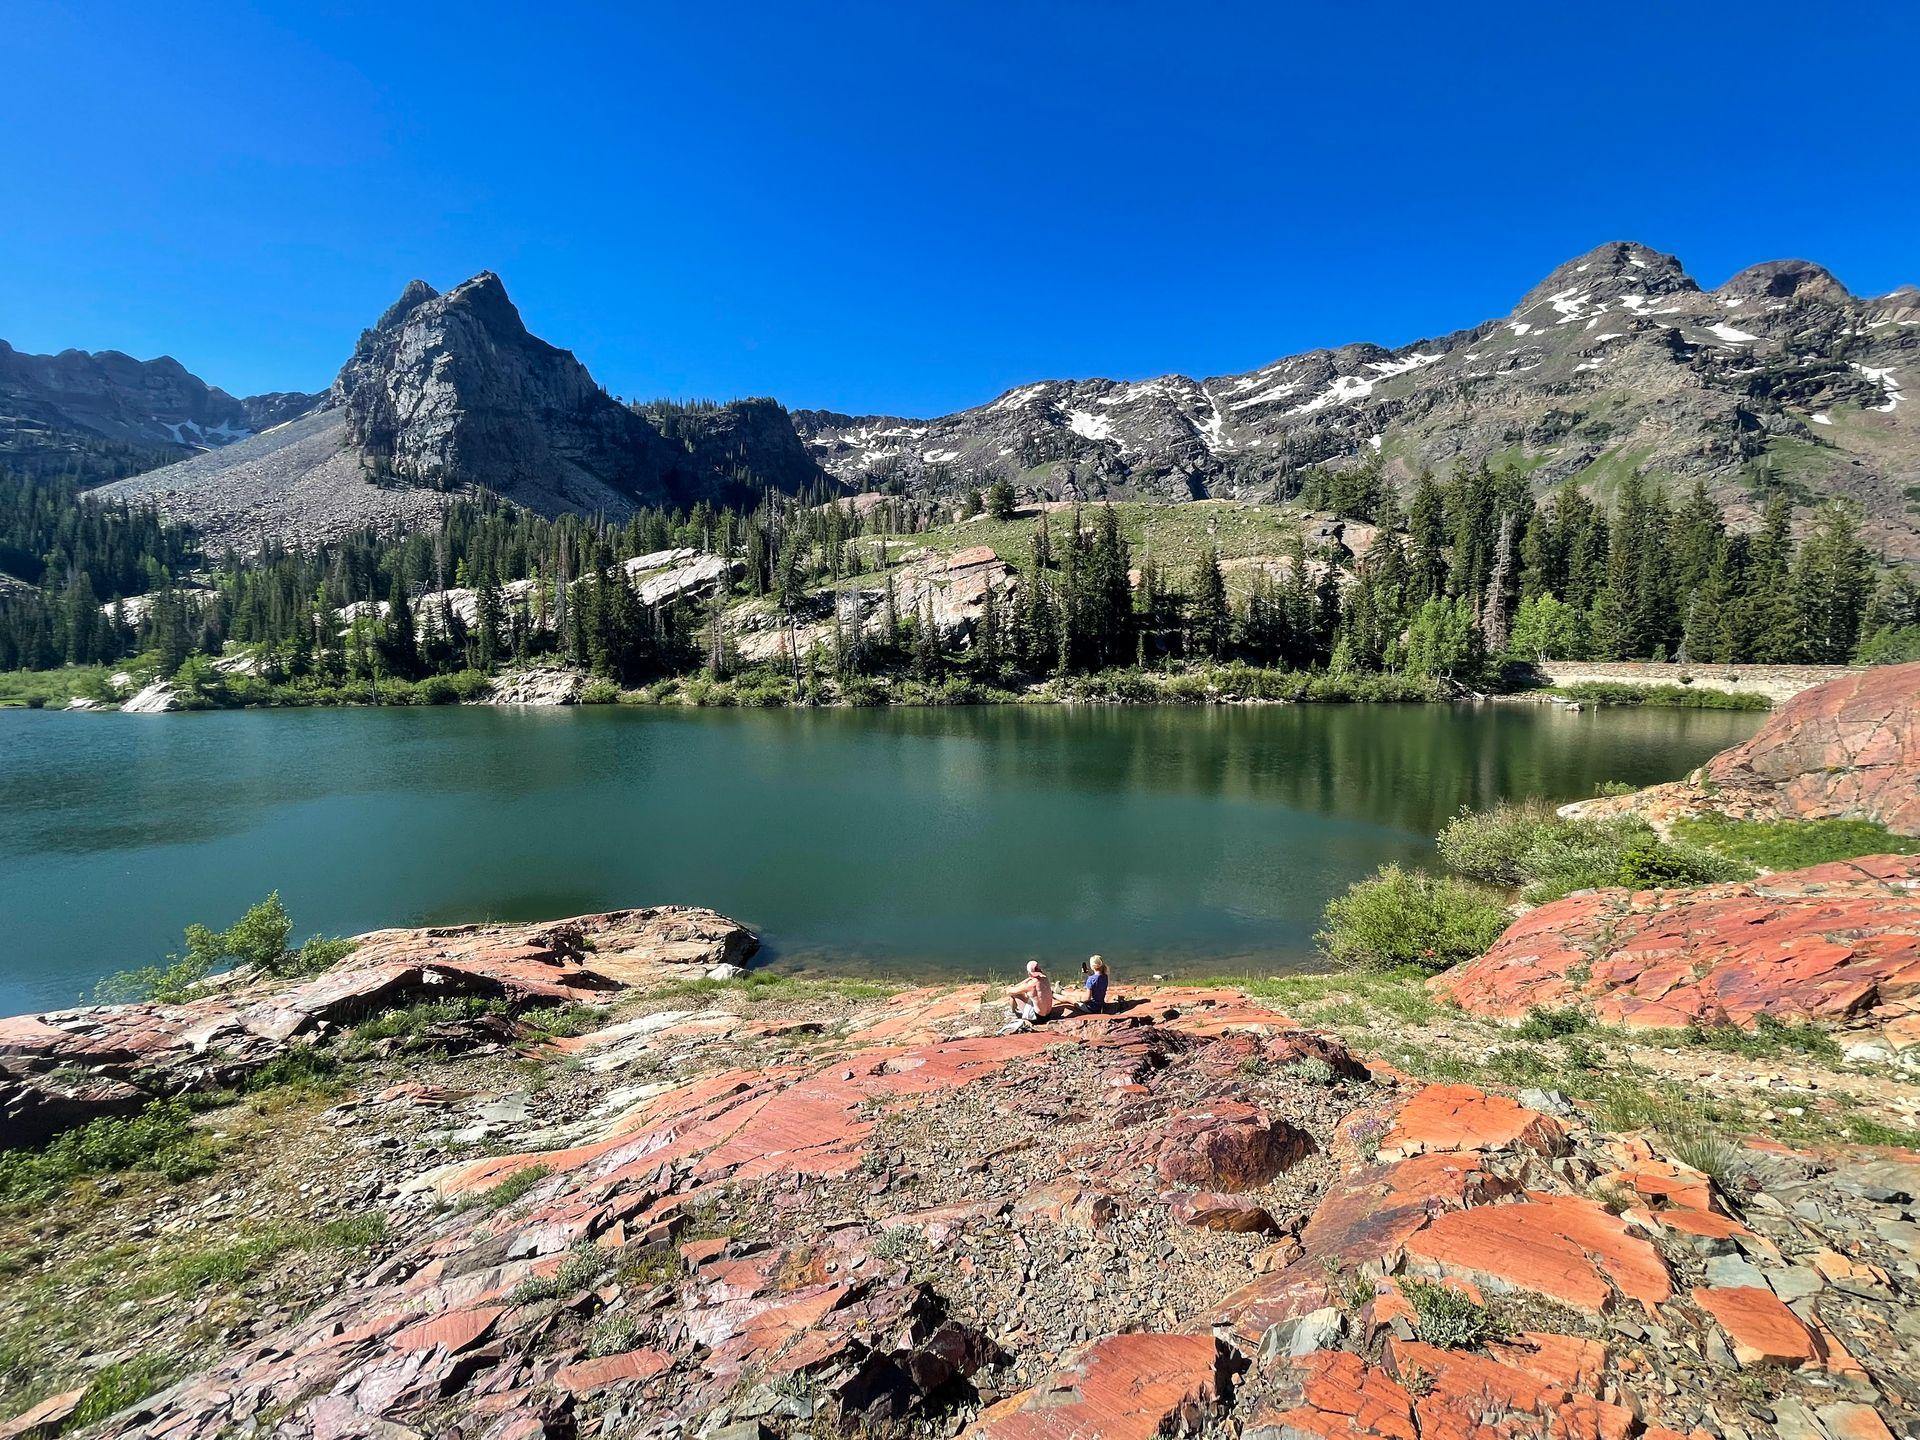 A view of Lake Blanche with orange rocks in front of it.